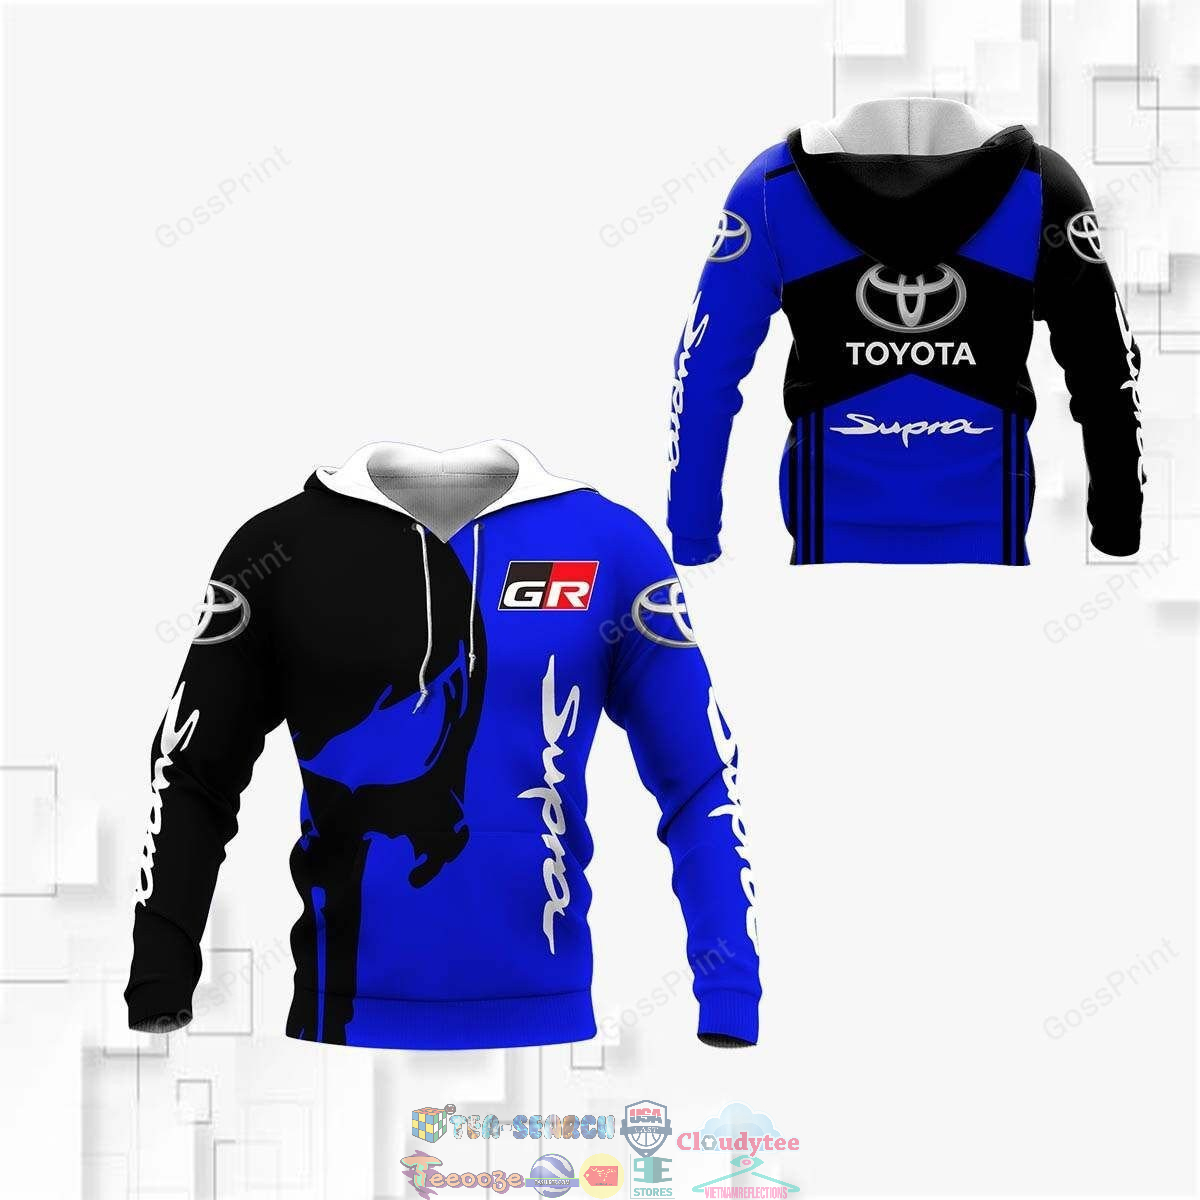 Toyota Supra ver 3 3D hoodie and t-shirt